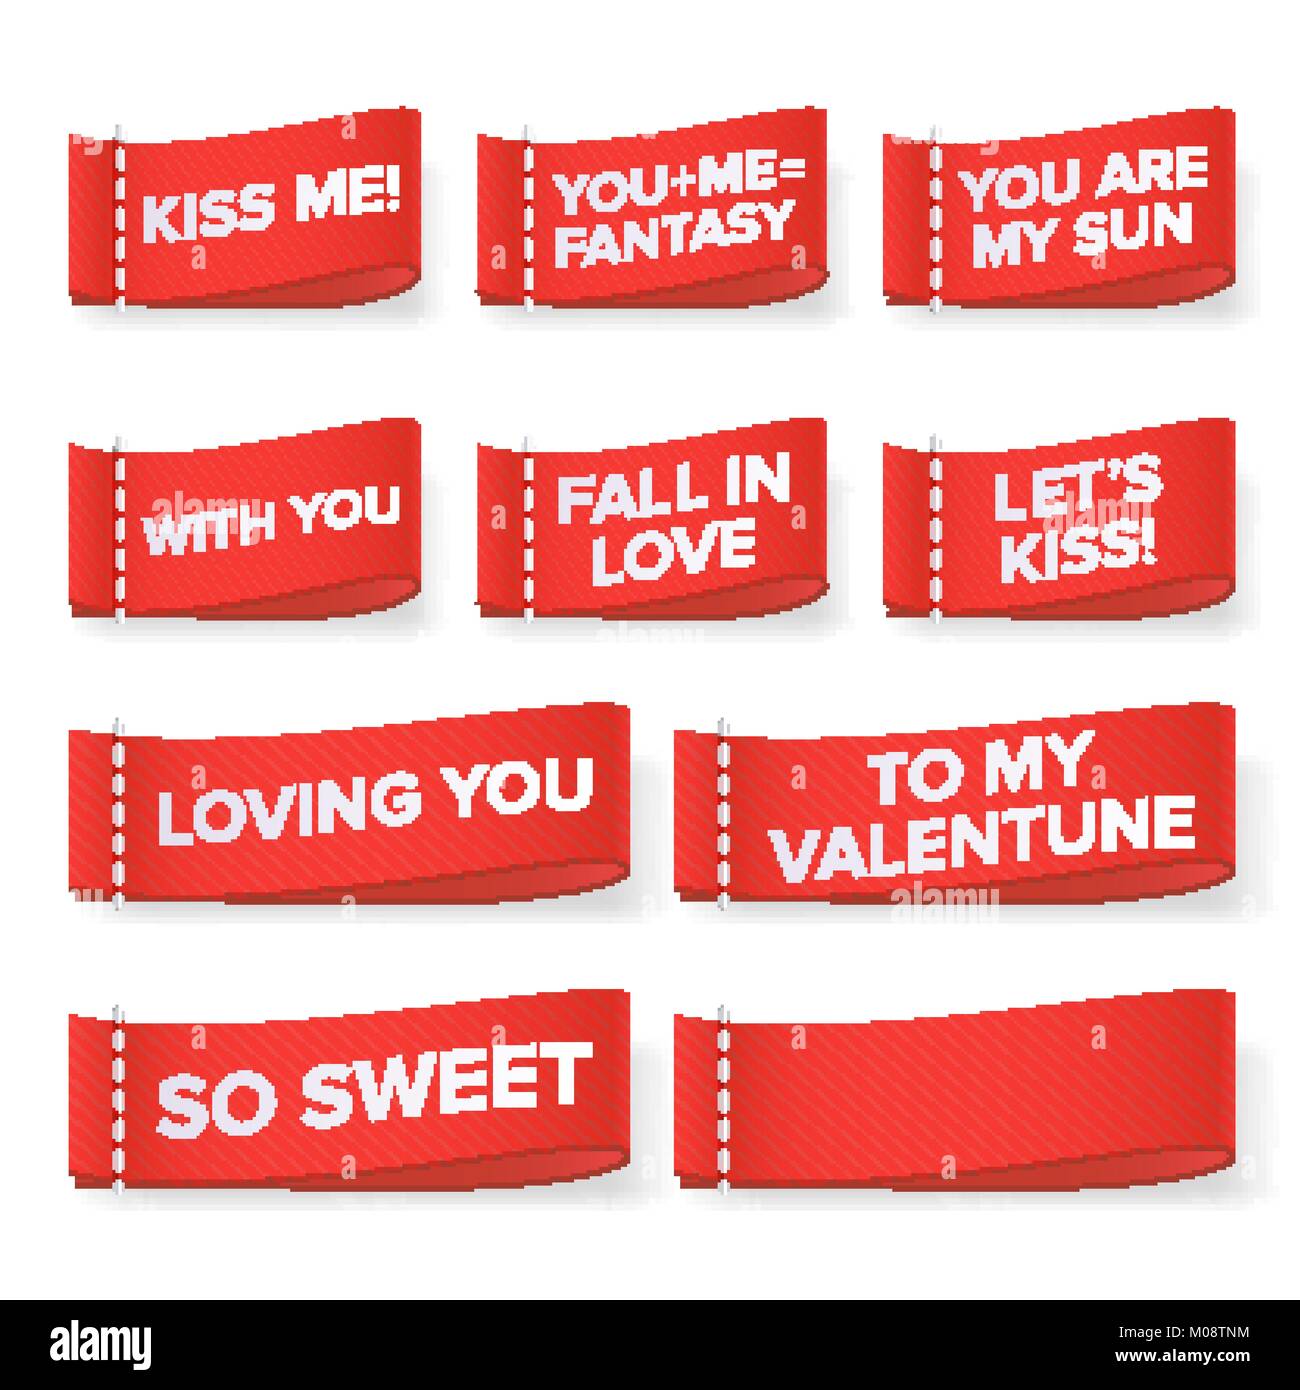 Valentine s Day Clothing labels Vector. Kiss Me, You Are My Sun, With You,  Fall In Love, Let s Kiss, Loving You, So Sweet, To My Valentine. Isolated I  Stock Vector Image